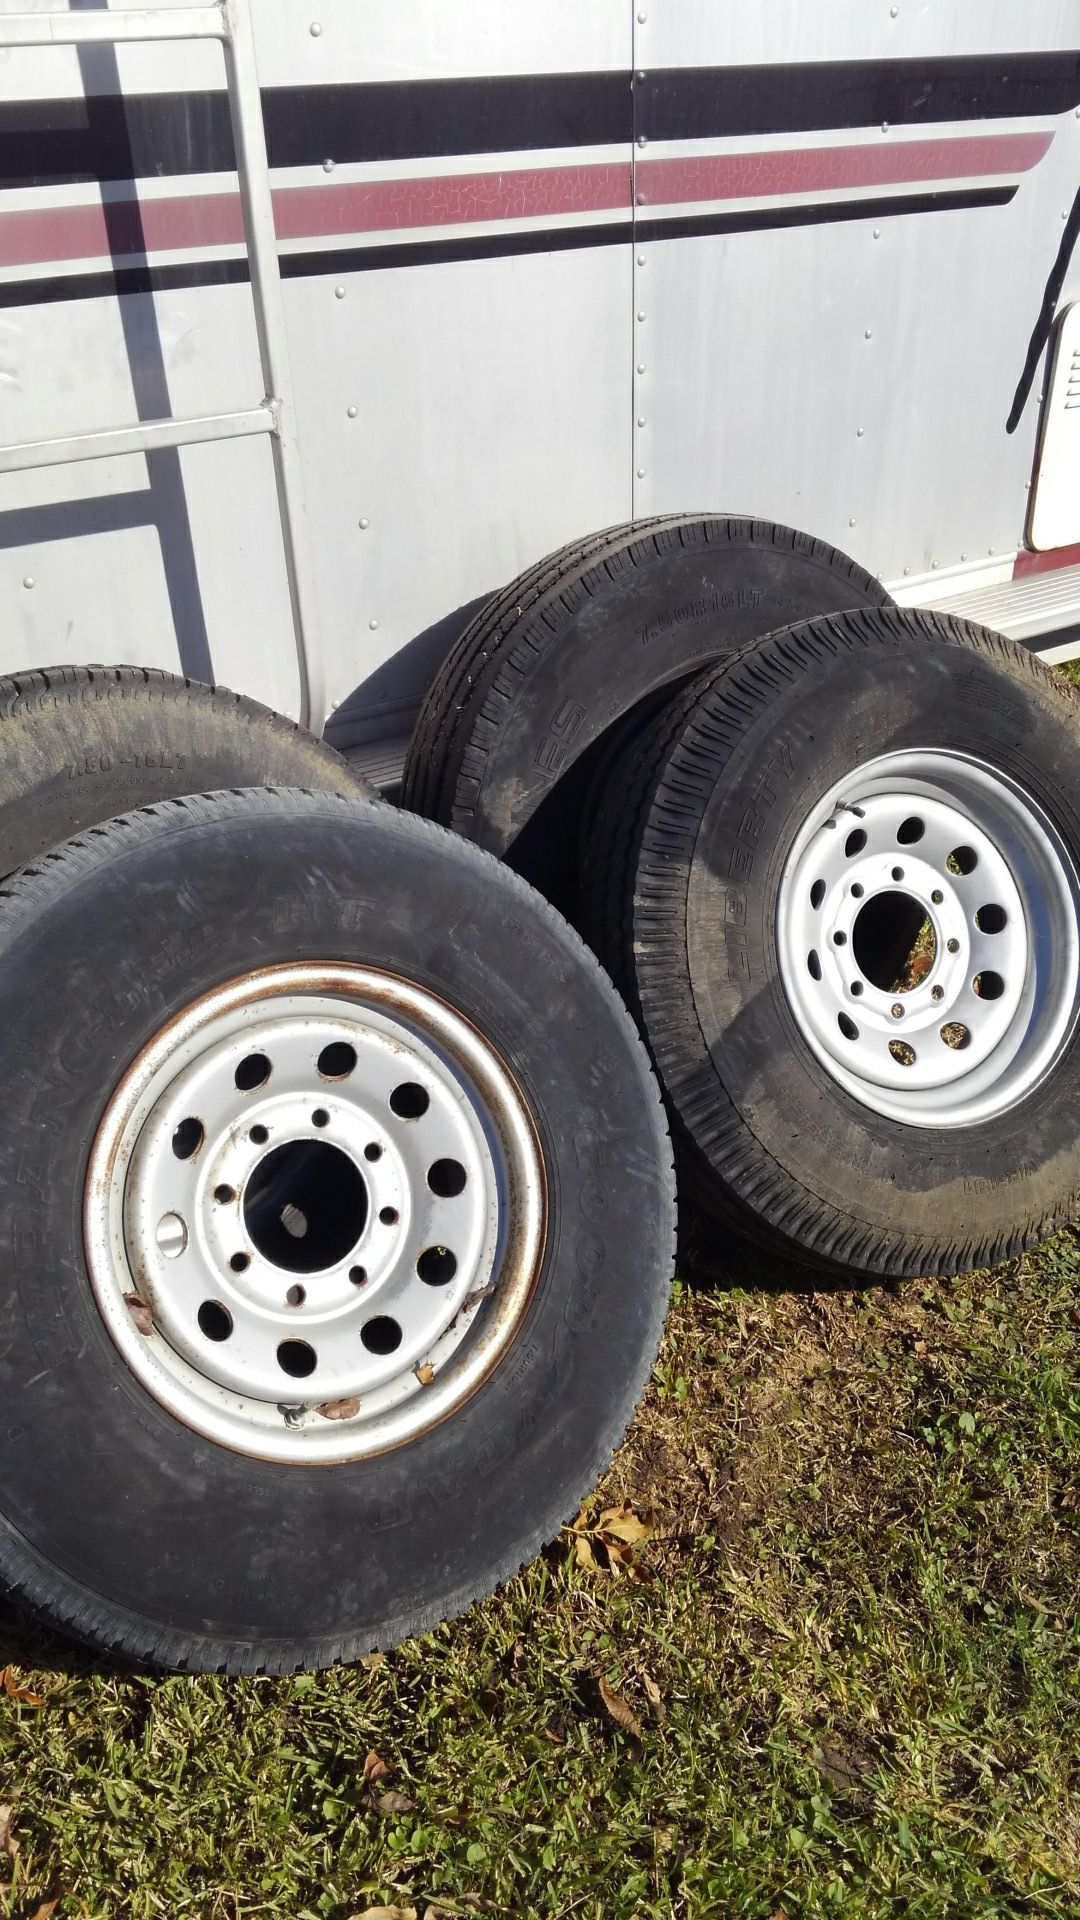 Trailer tires and wheels. 16 in eight lug.